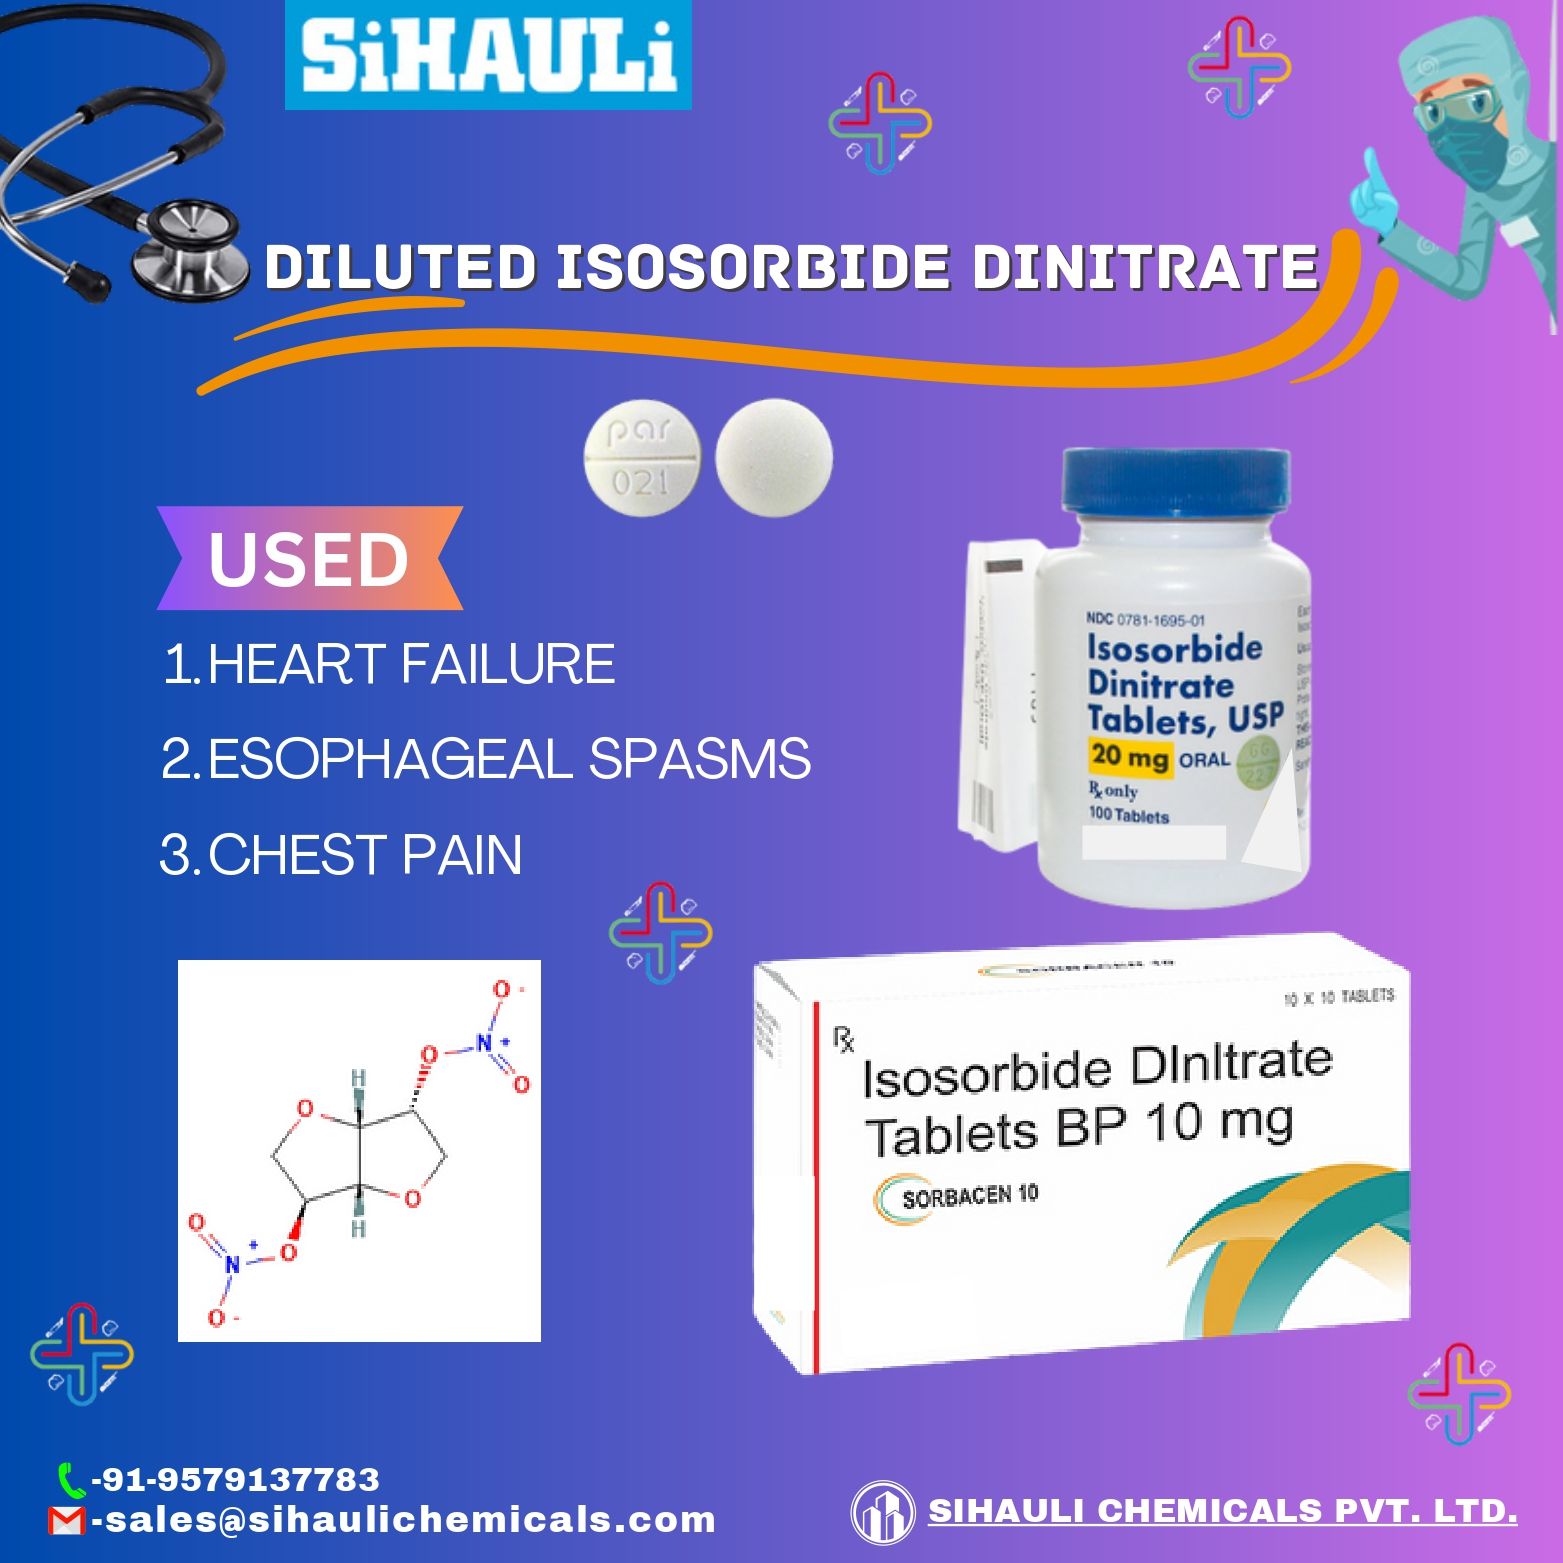 You are currently viewing Diluted Isosorbide Dinitrate Manufacturers In Mumbai